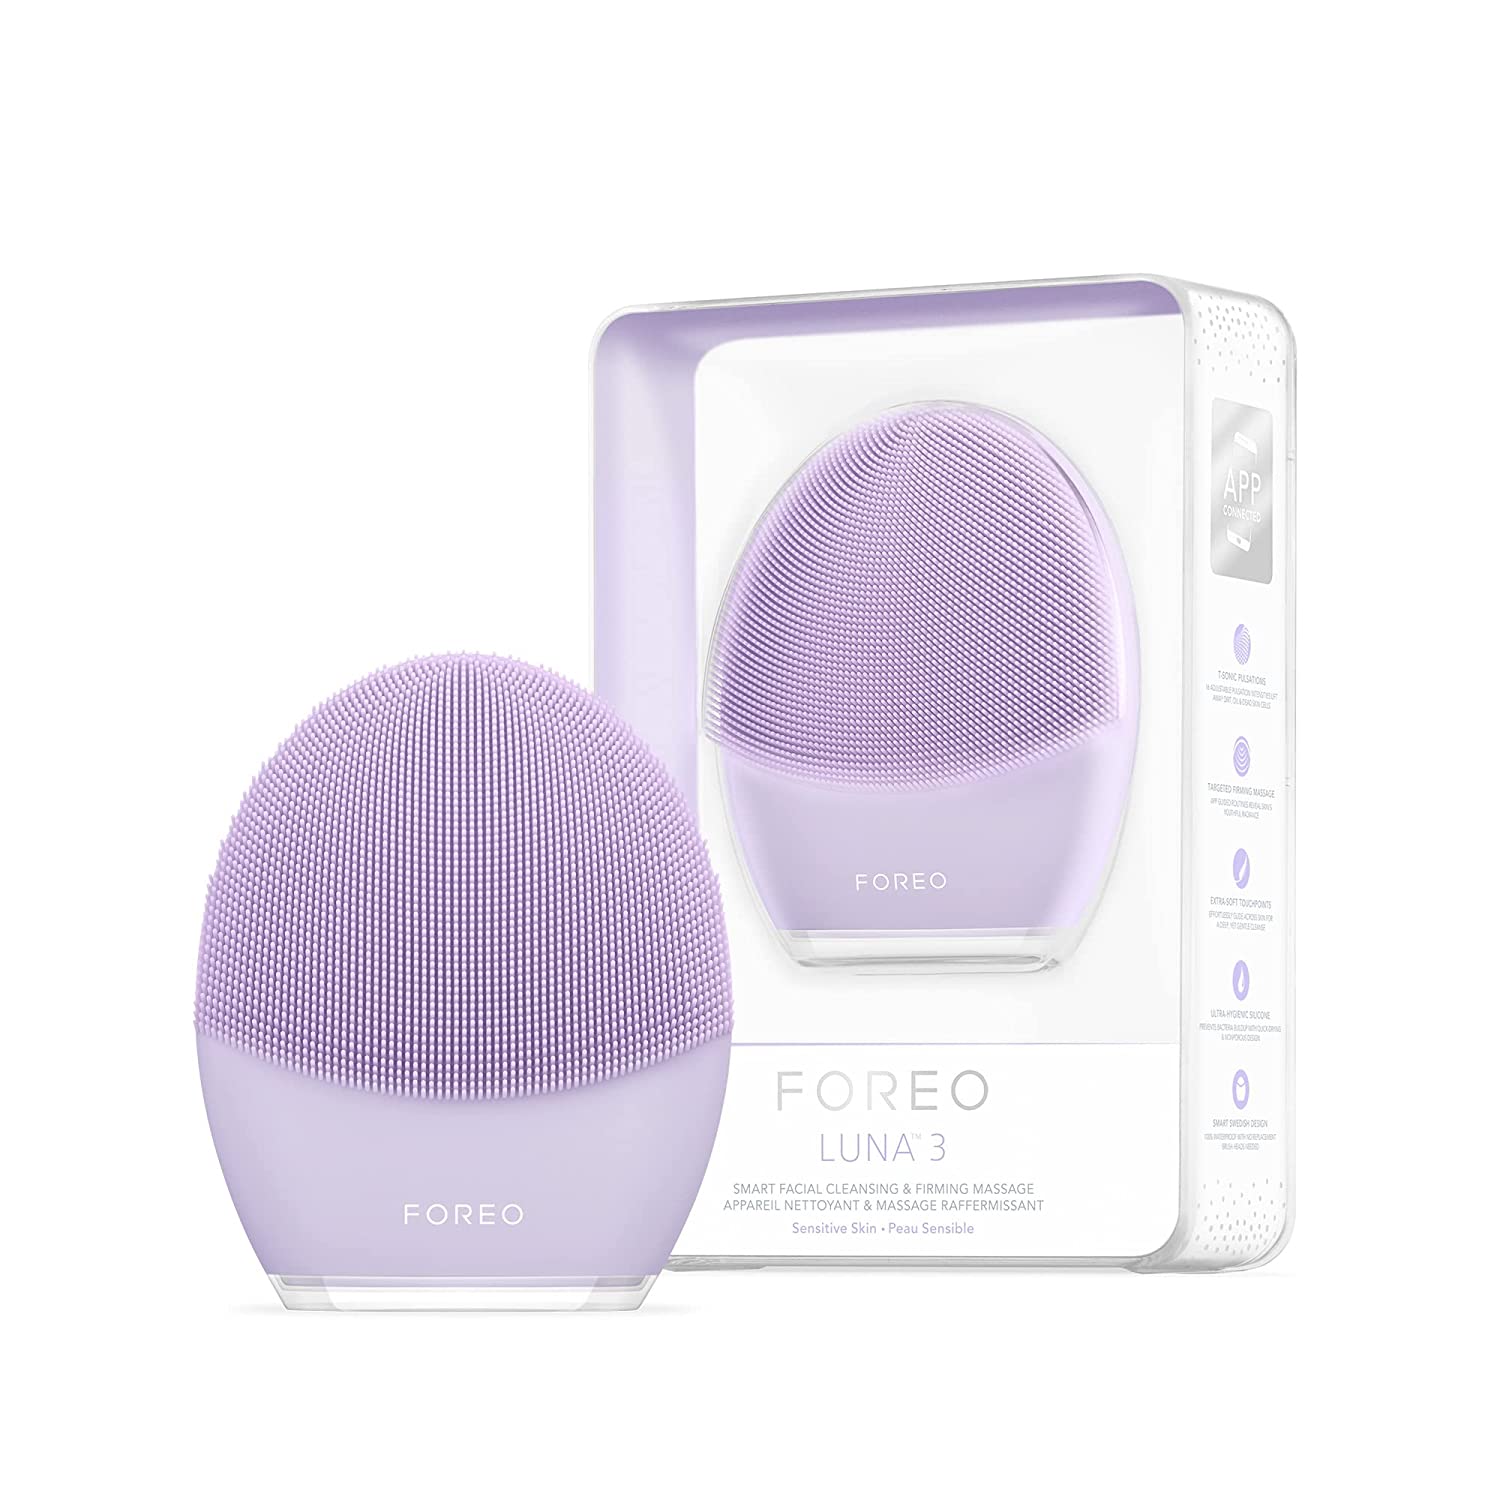 Foreo LUNA 3 Facial Cleansing Brush & Anti Aging Face Massager